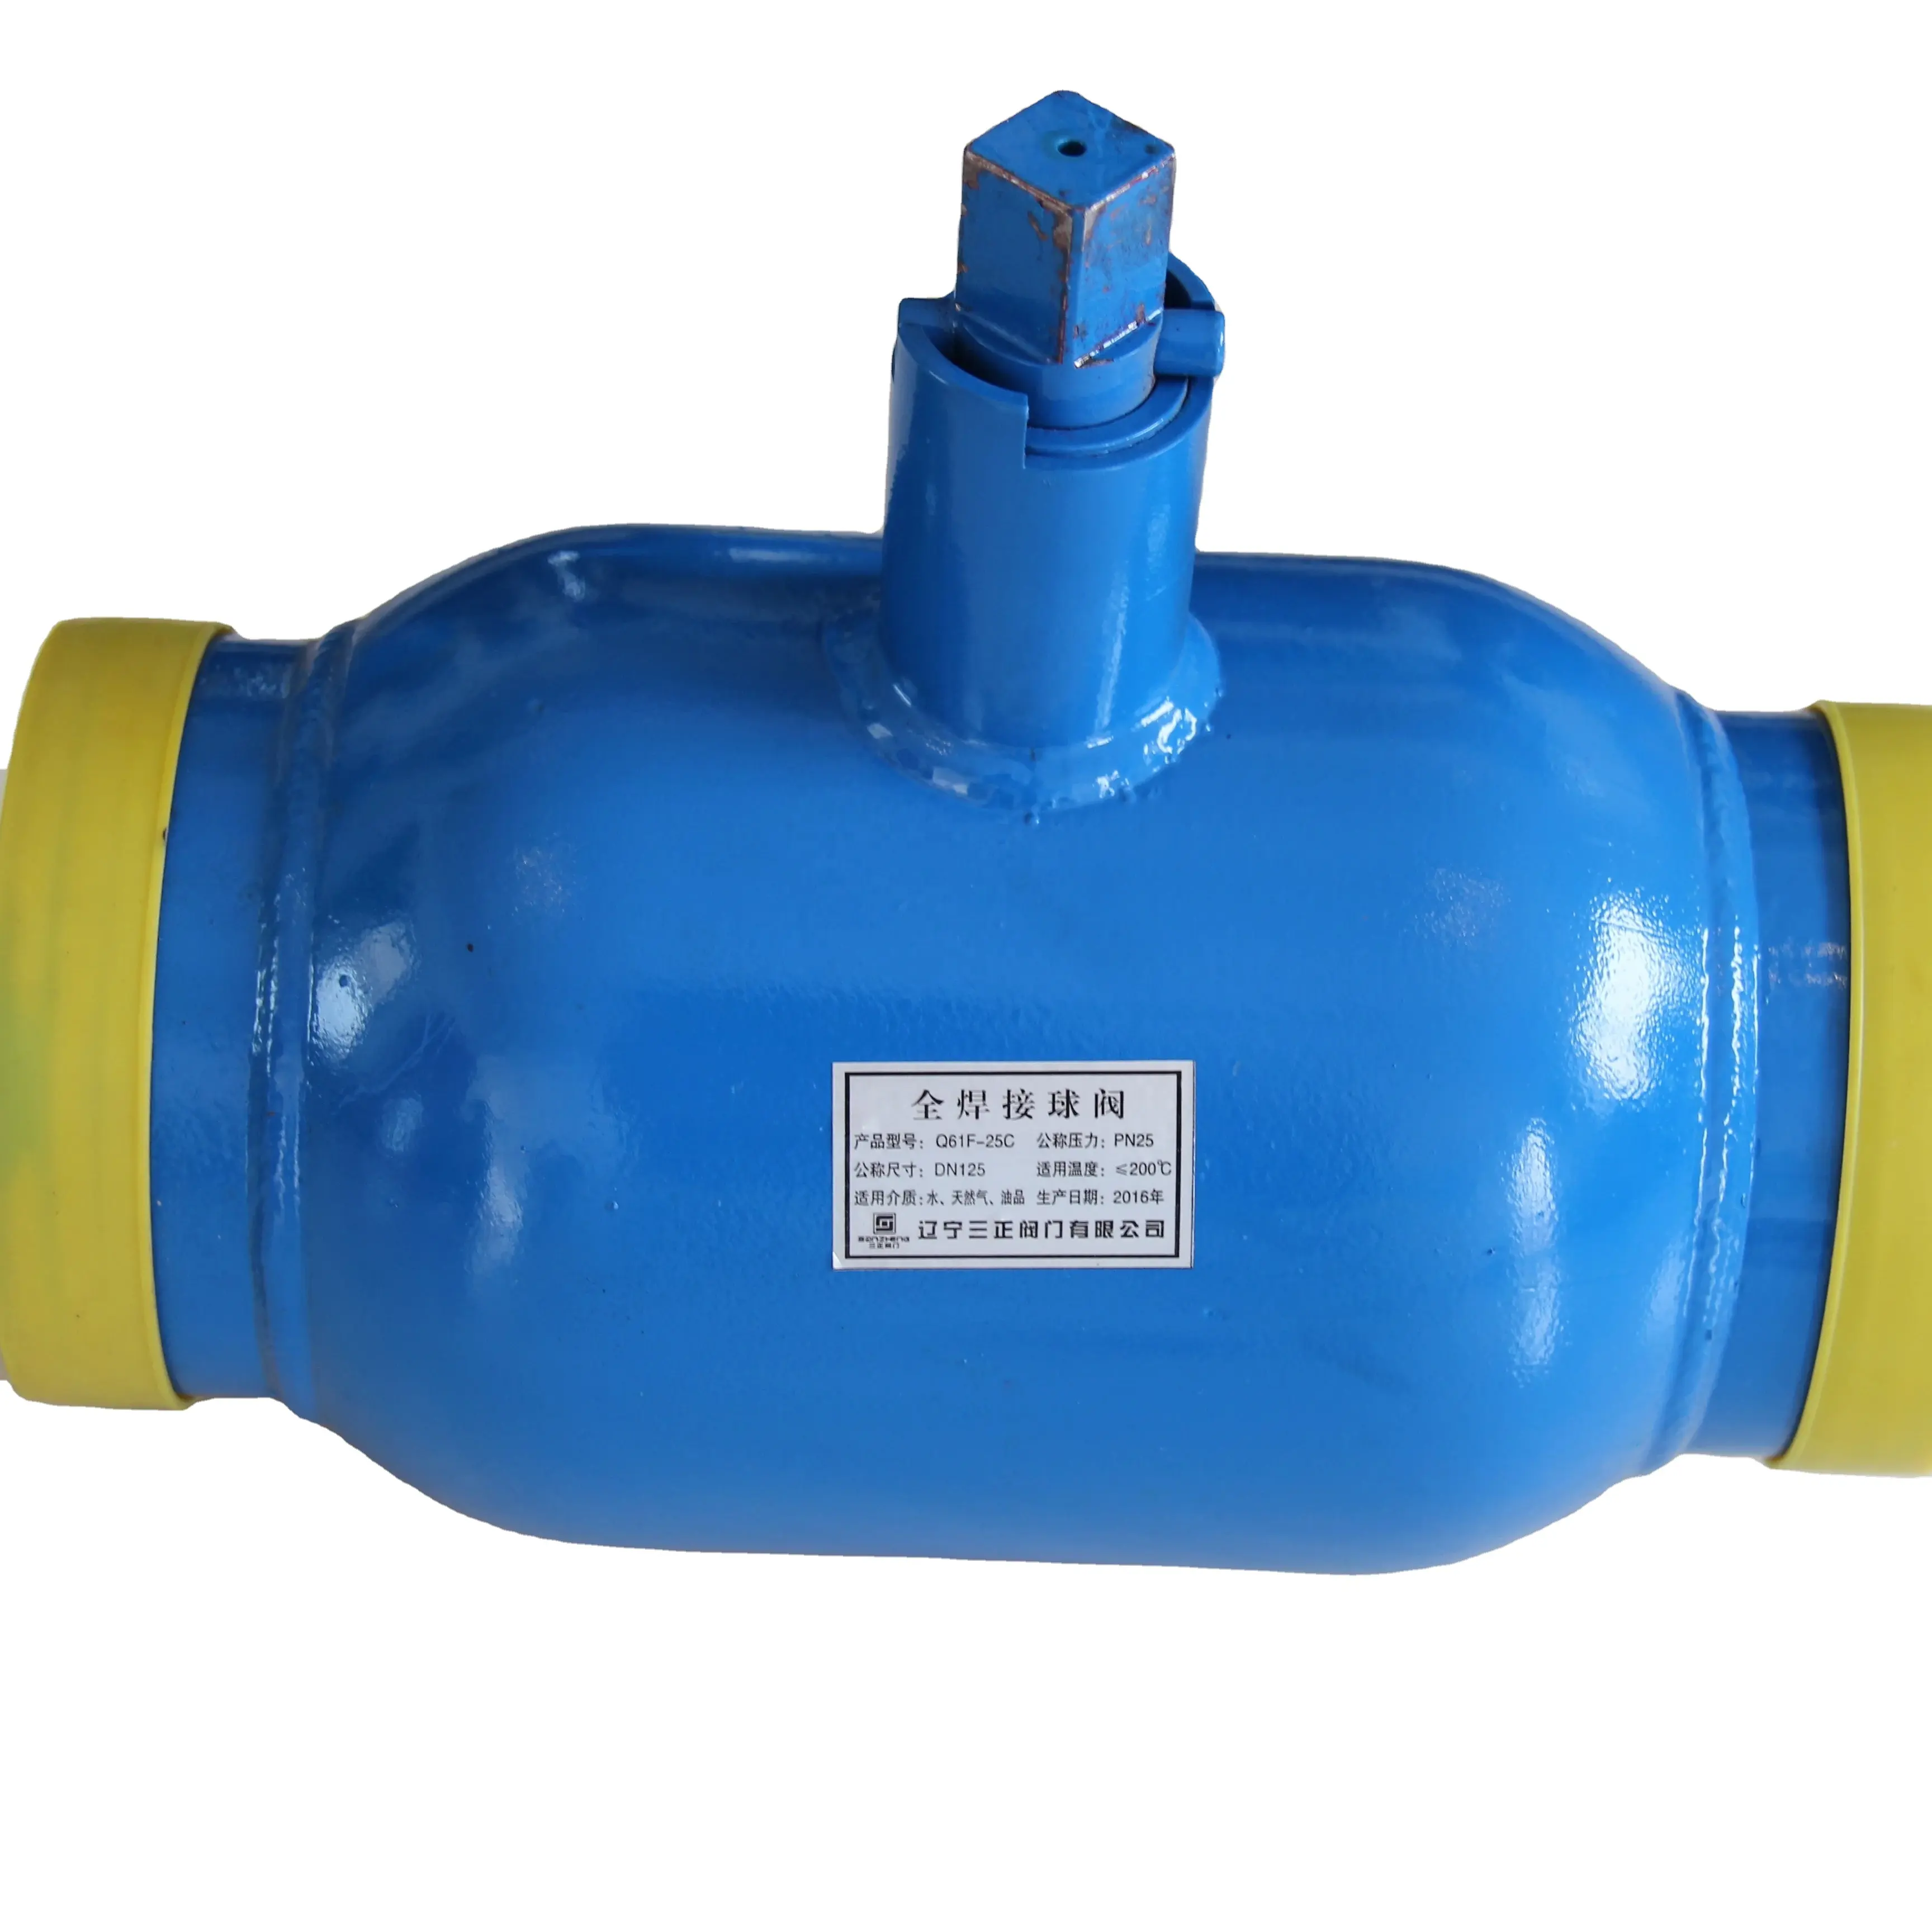 STAINLESS STEEL SOFT SEAL REDUCED DIAMETER TURBINE BALL VALVE Q367F DN 350 WATER/GAS WITH LOW PRESSURE PRODUCED IN LIAONING